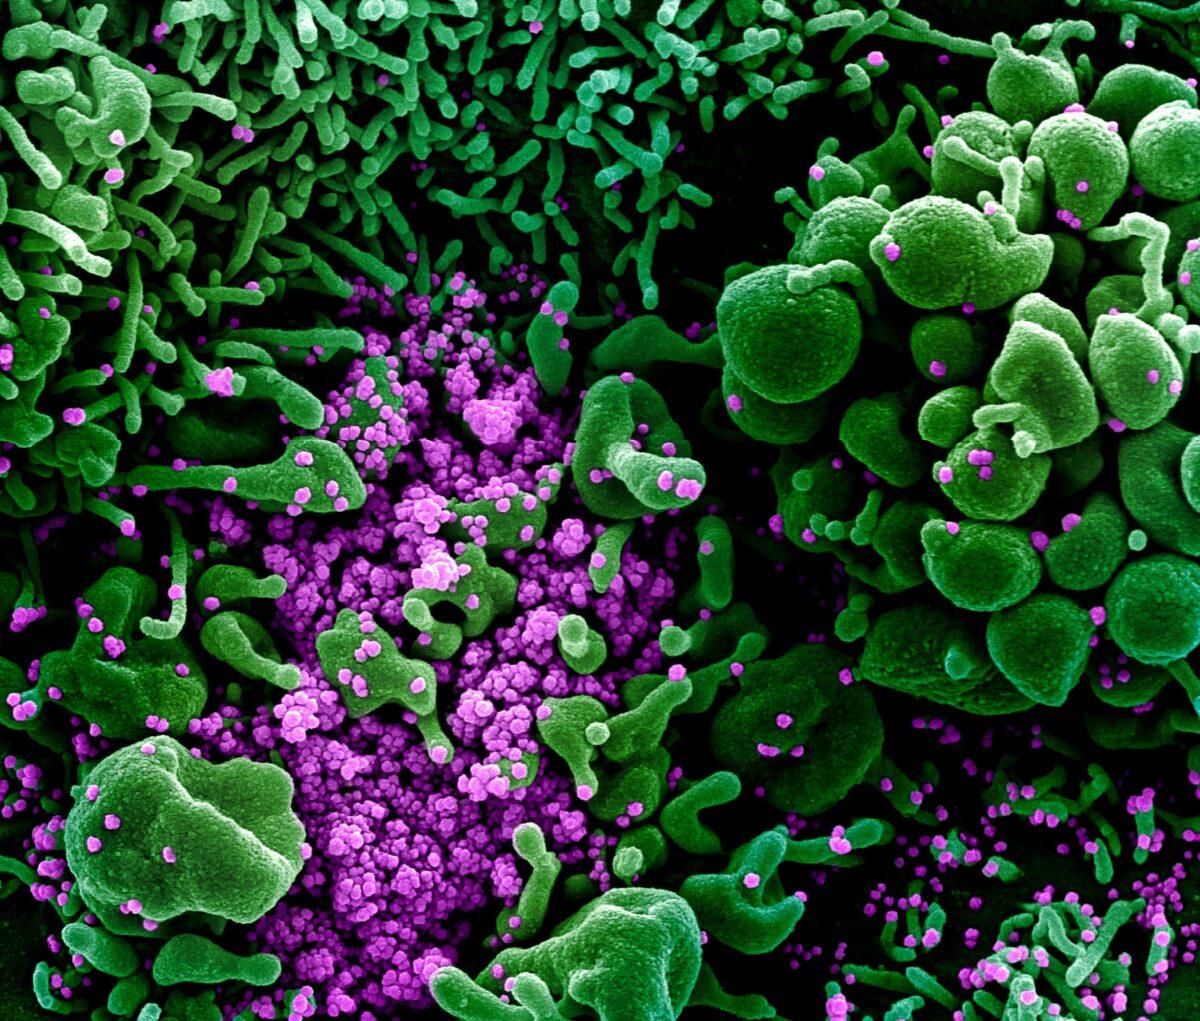 Colorized scanning electron micrograph of a cell (green) heavily infected with CCP virus particles (purple), commonly known as SARS-CoV-2 or novel coronavirus, isolated from a patient sample on March 16, 2020. (NIAID)